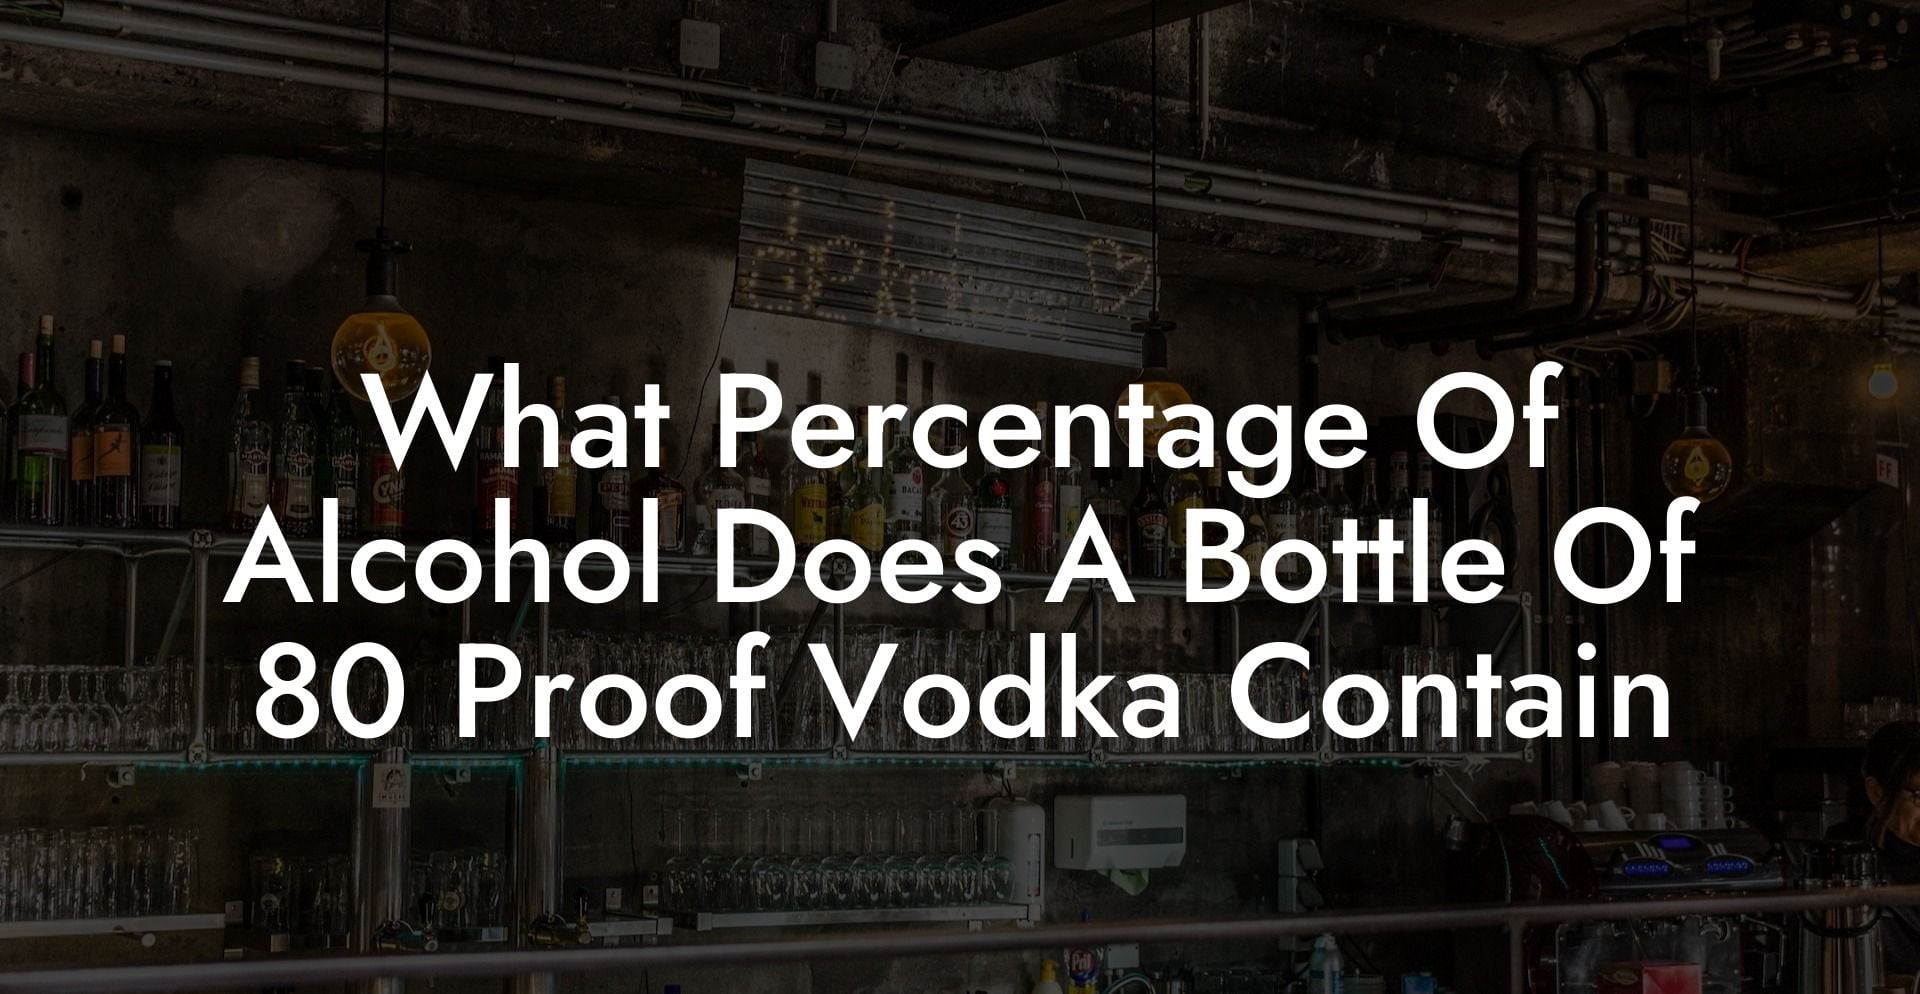 What Percentage Of Alcohol Does A Bottle Of 80 Proof Vodka Contain